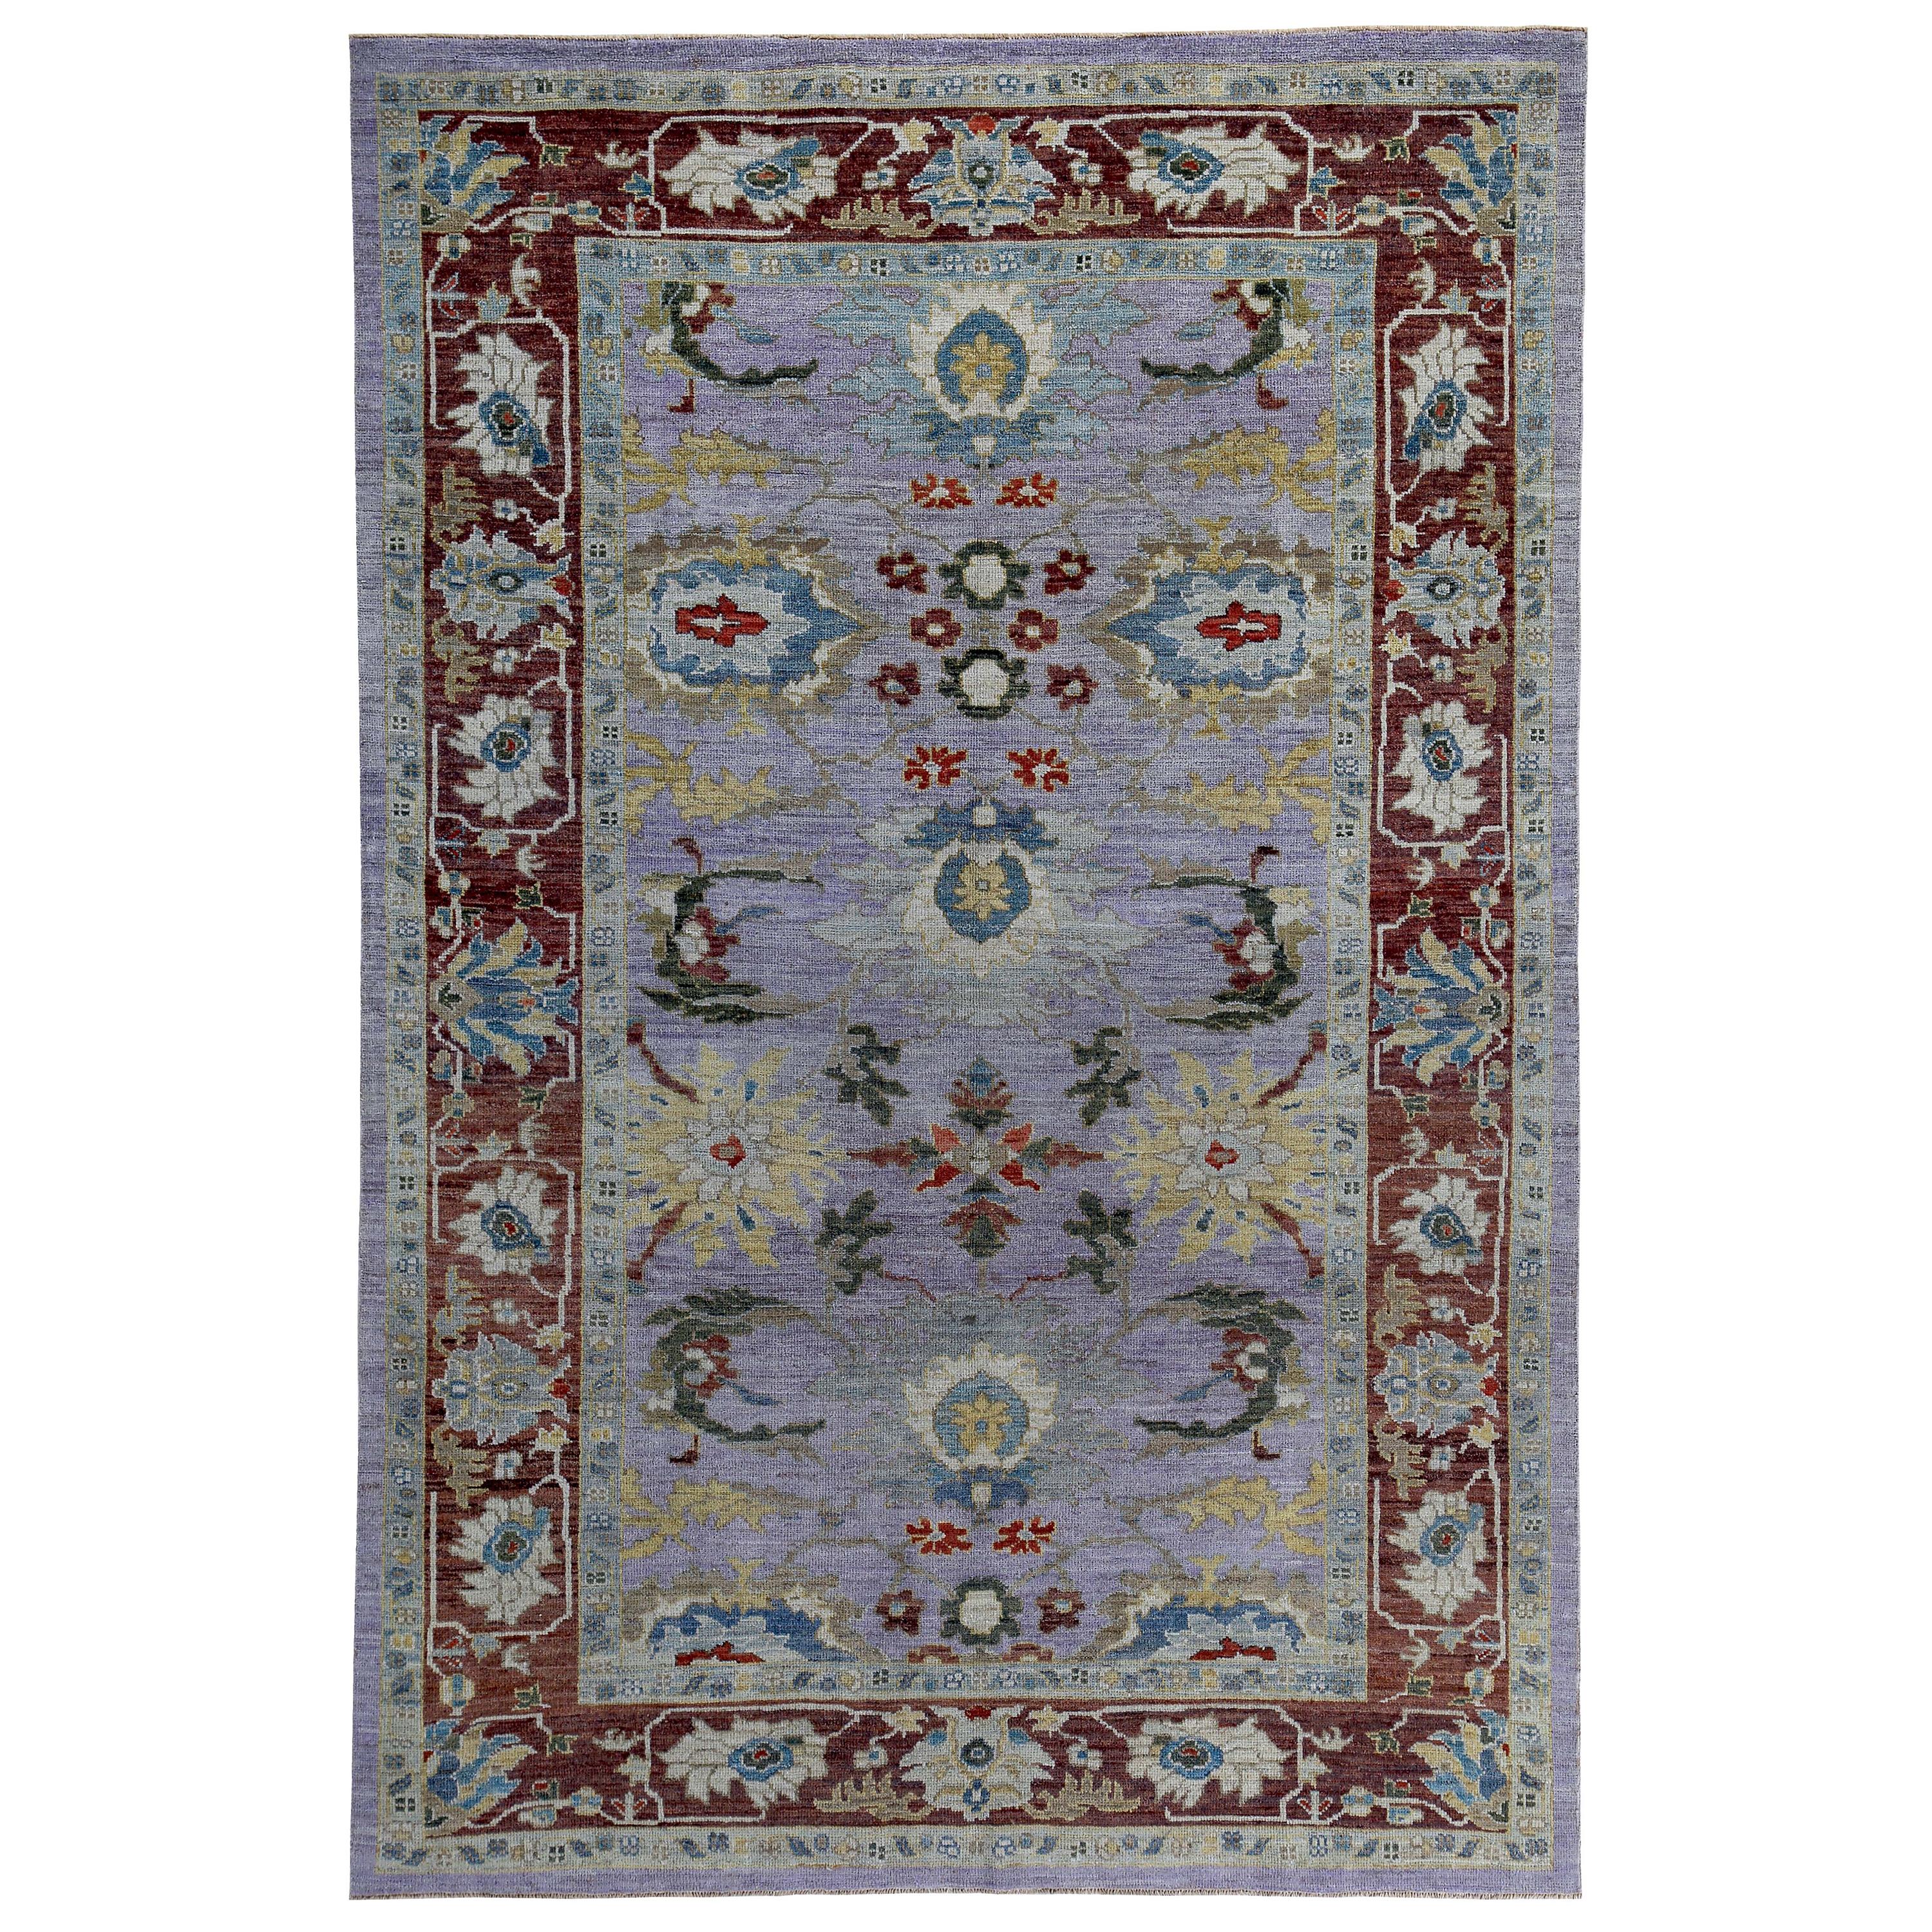 New Turkish Rug Sultanabad Design with Brown, Blue and Purple Botanical Details For Sale